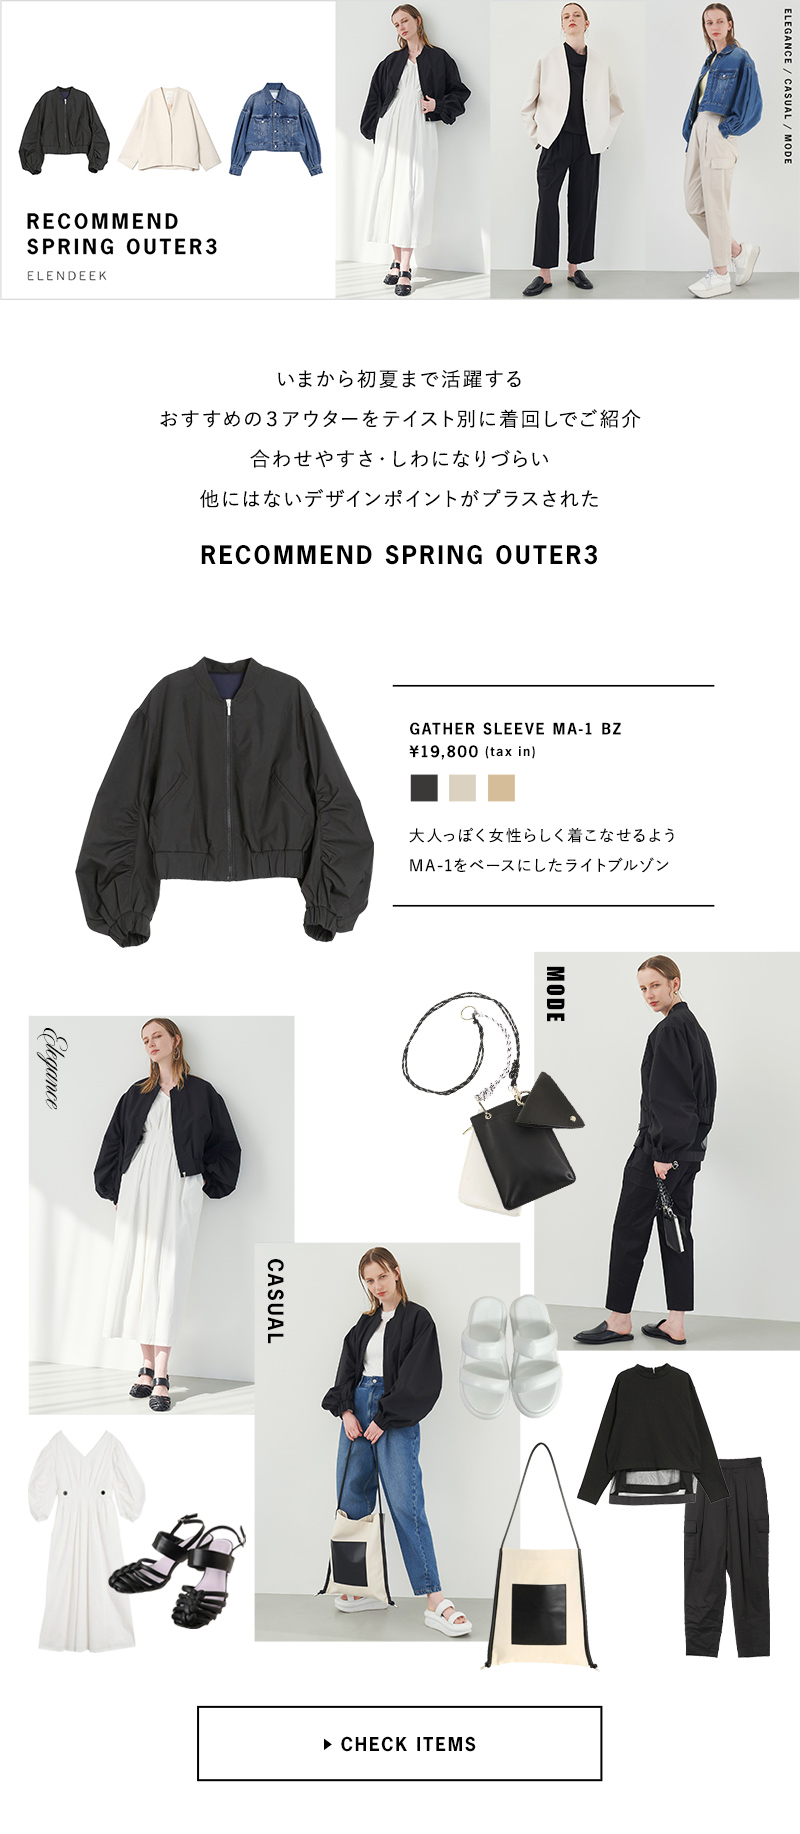 RECOMMEND SPRING OUTER3